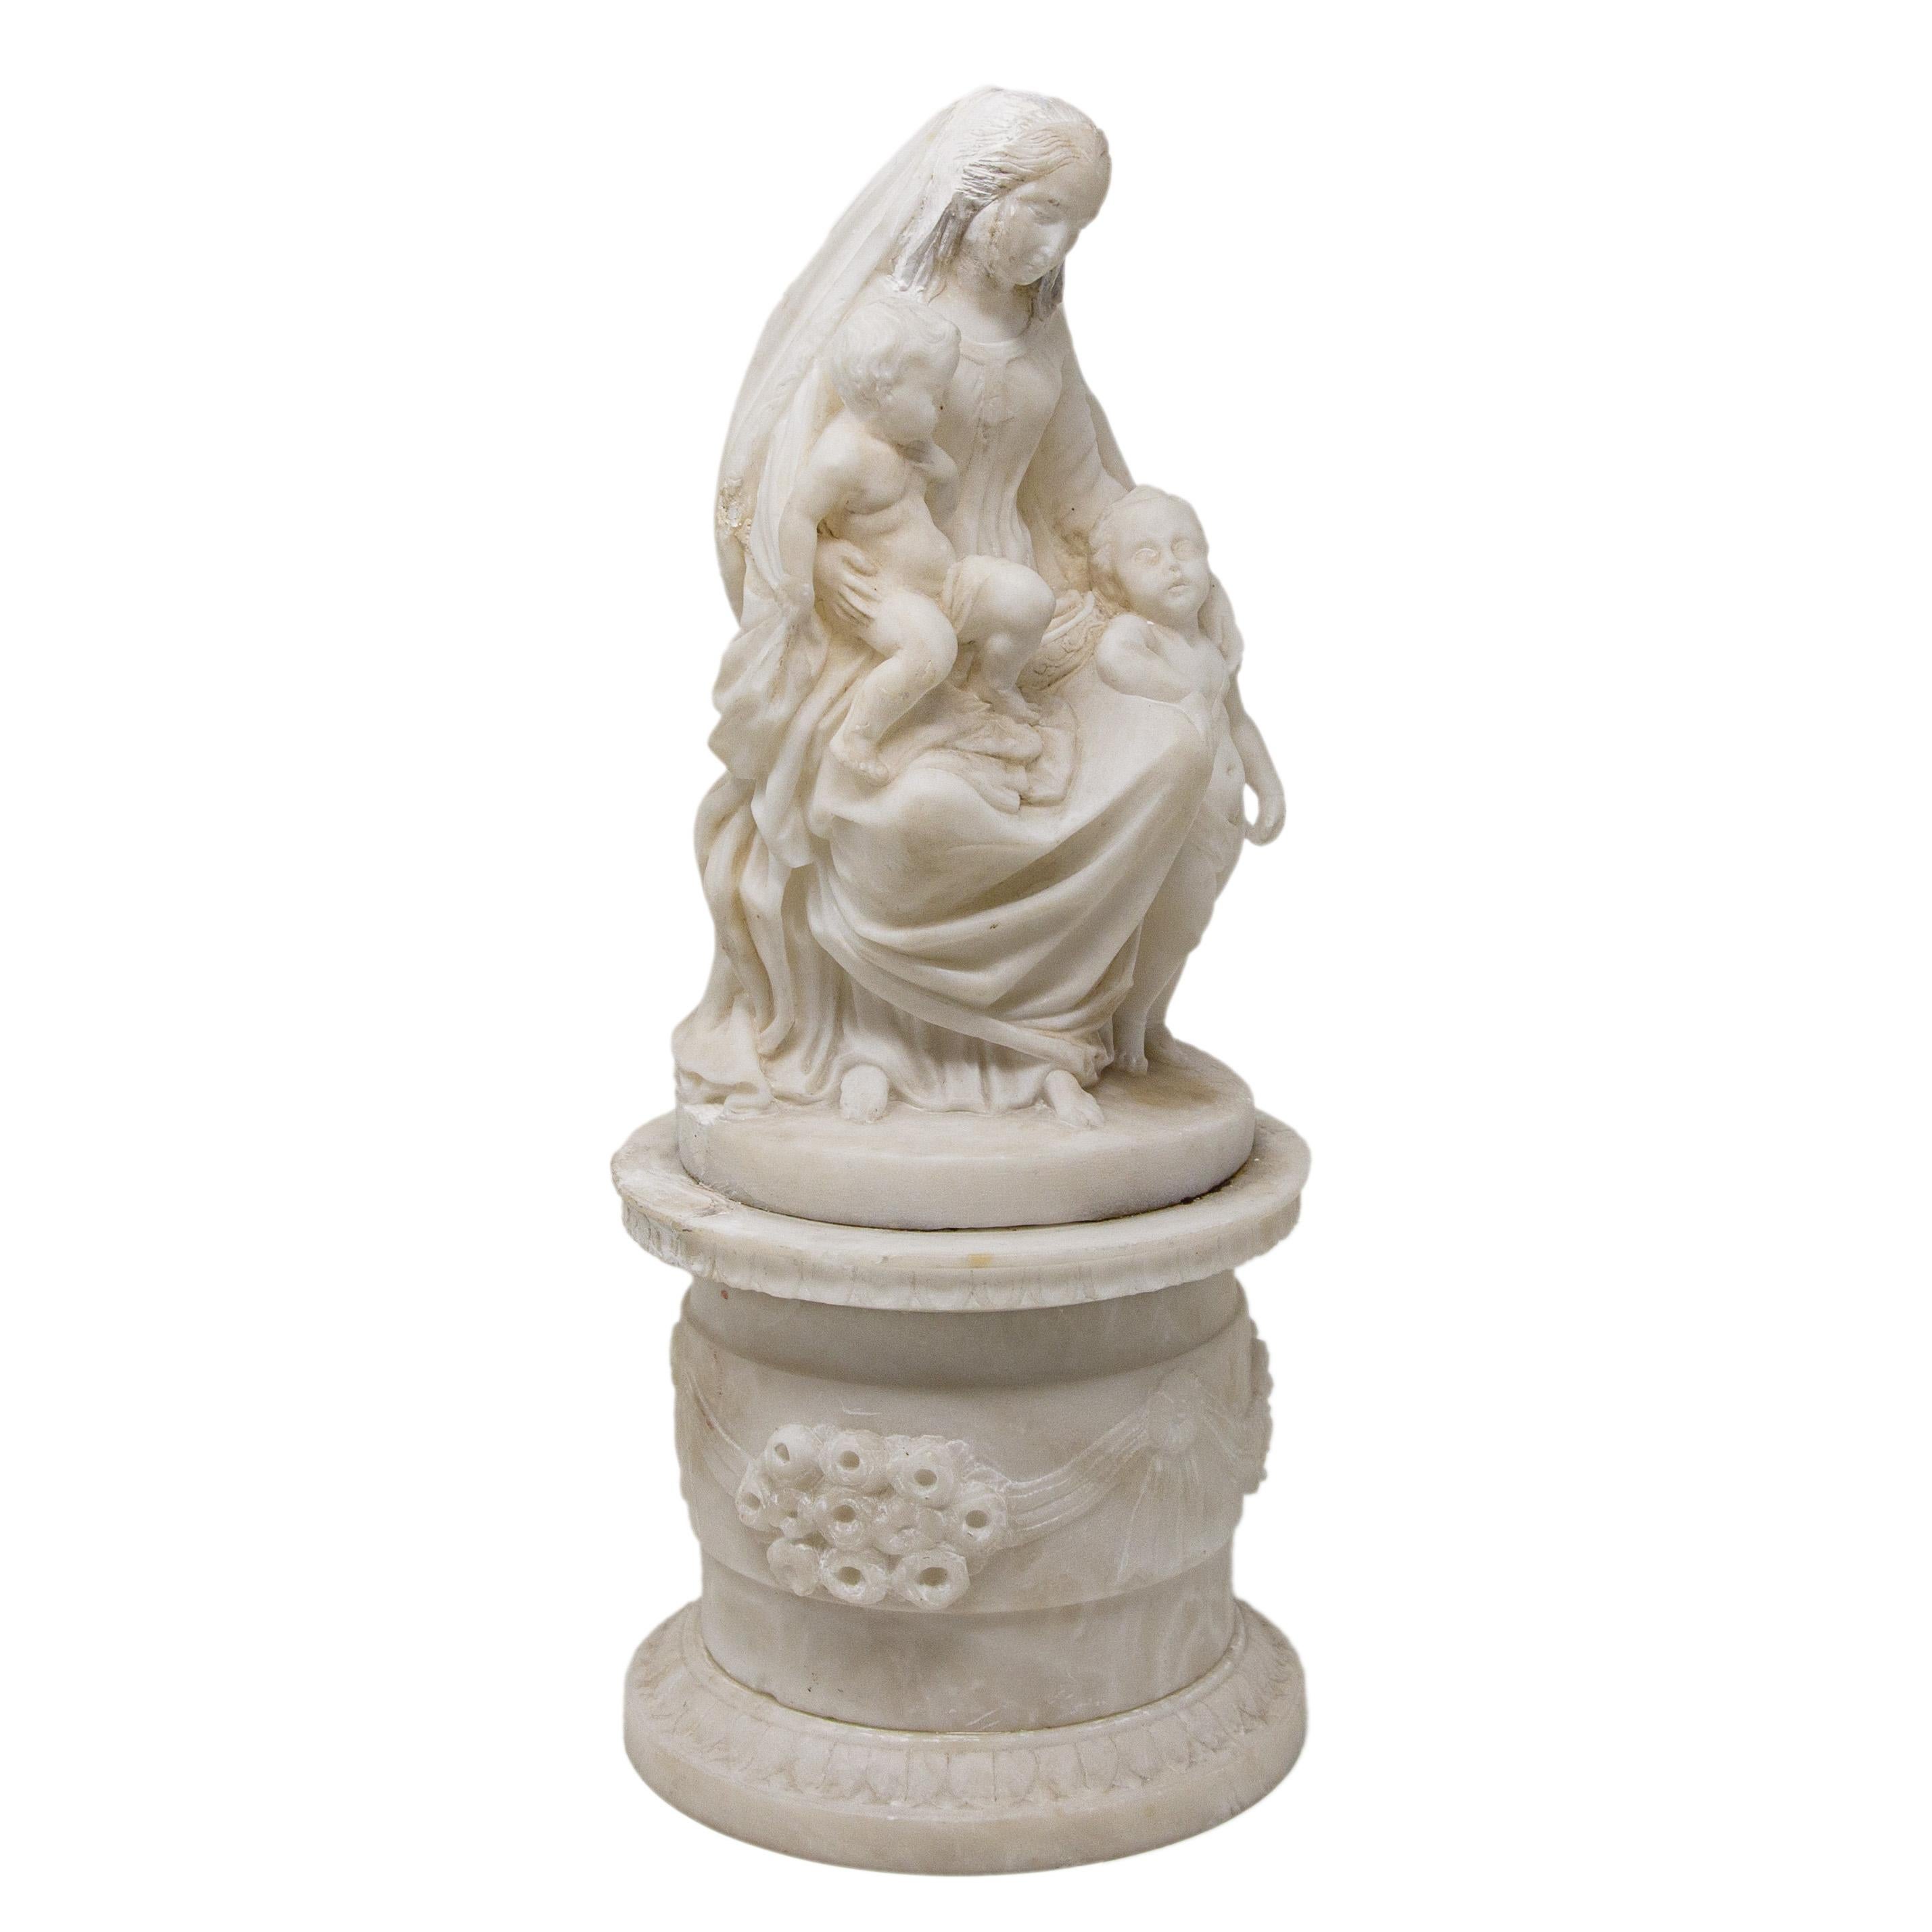 19thC

Madonna with Child and San Giovannino

Alabaster, cm h. 29

The item is in good condition